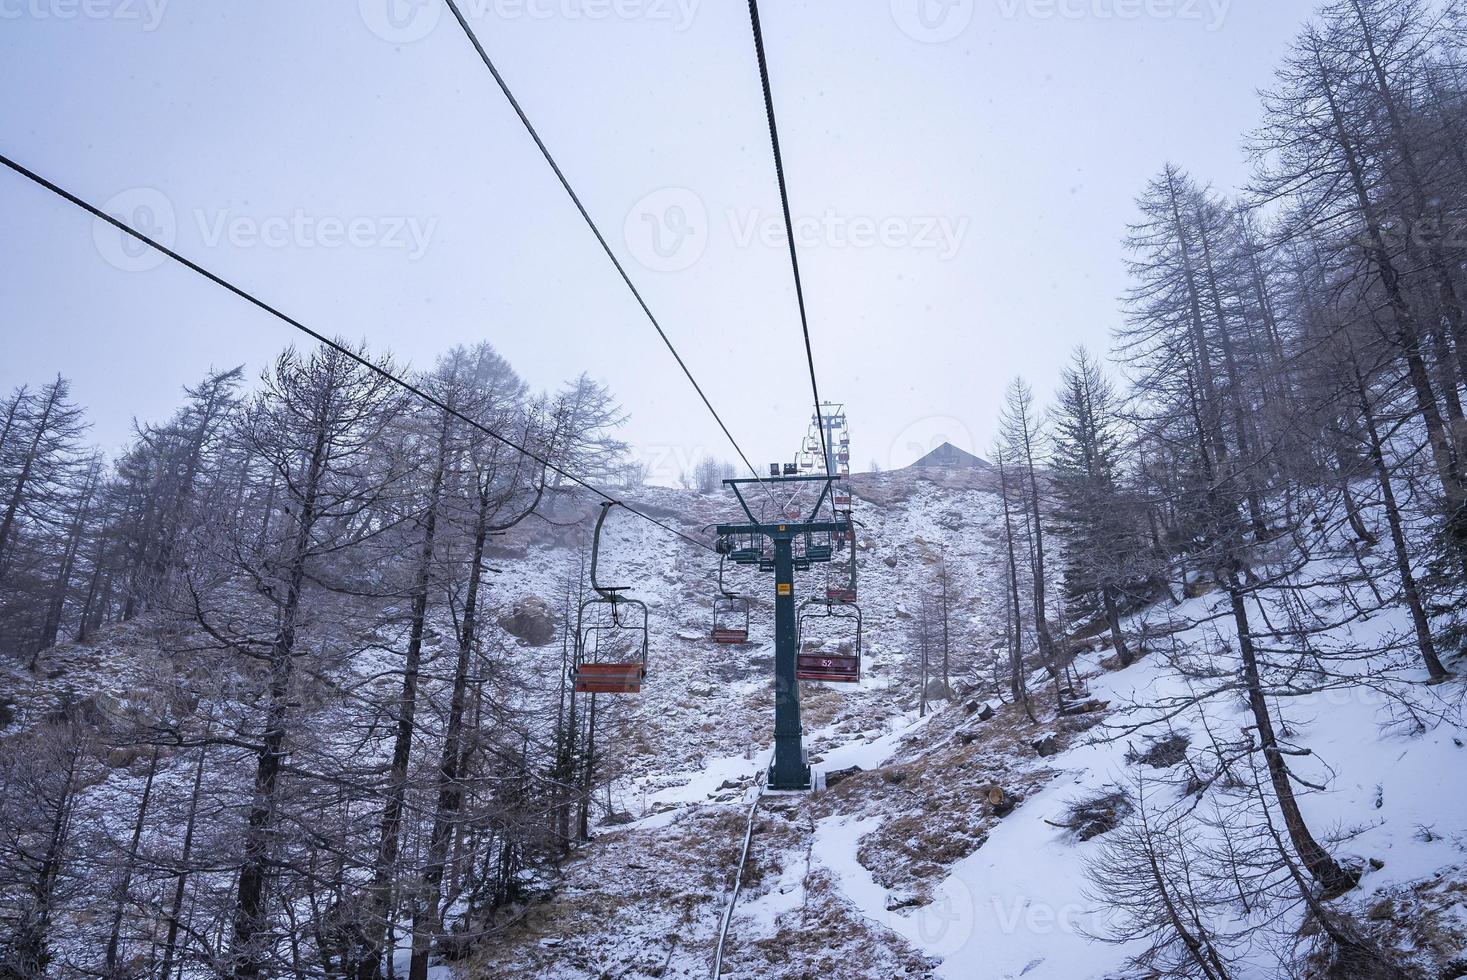 Empty chair ski lift amidst snow covered pine trees forest photo